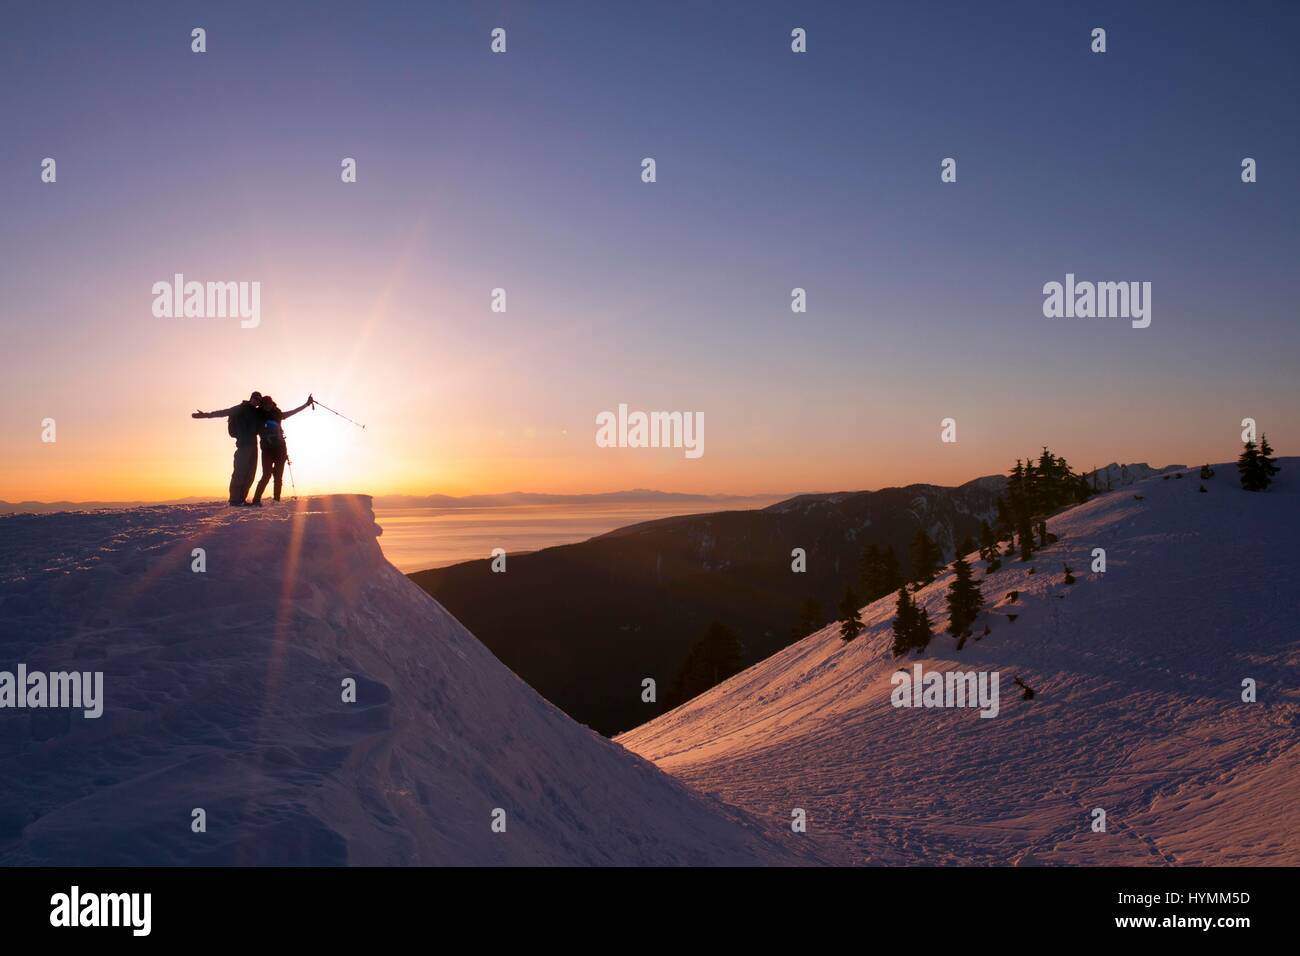 Silhouette of female hiker watching sunset in the background on Mount Seymour, Vancouver, British Columbia, Canada Stock Photo